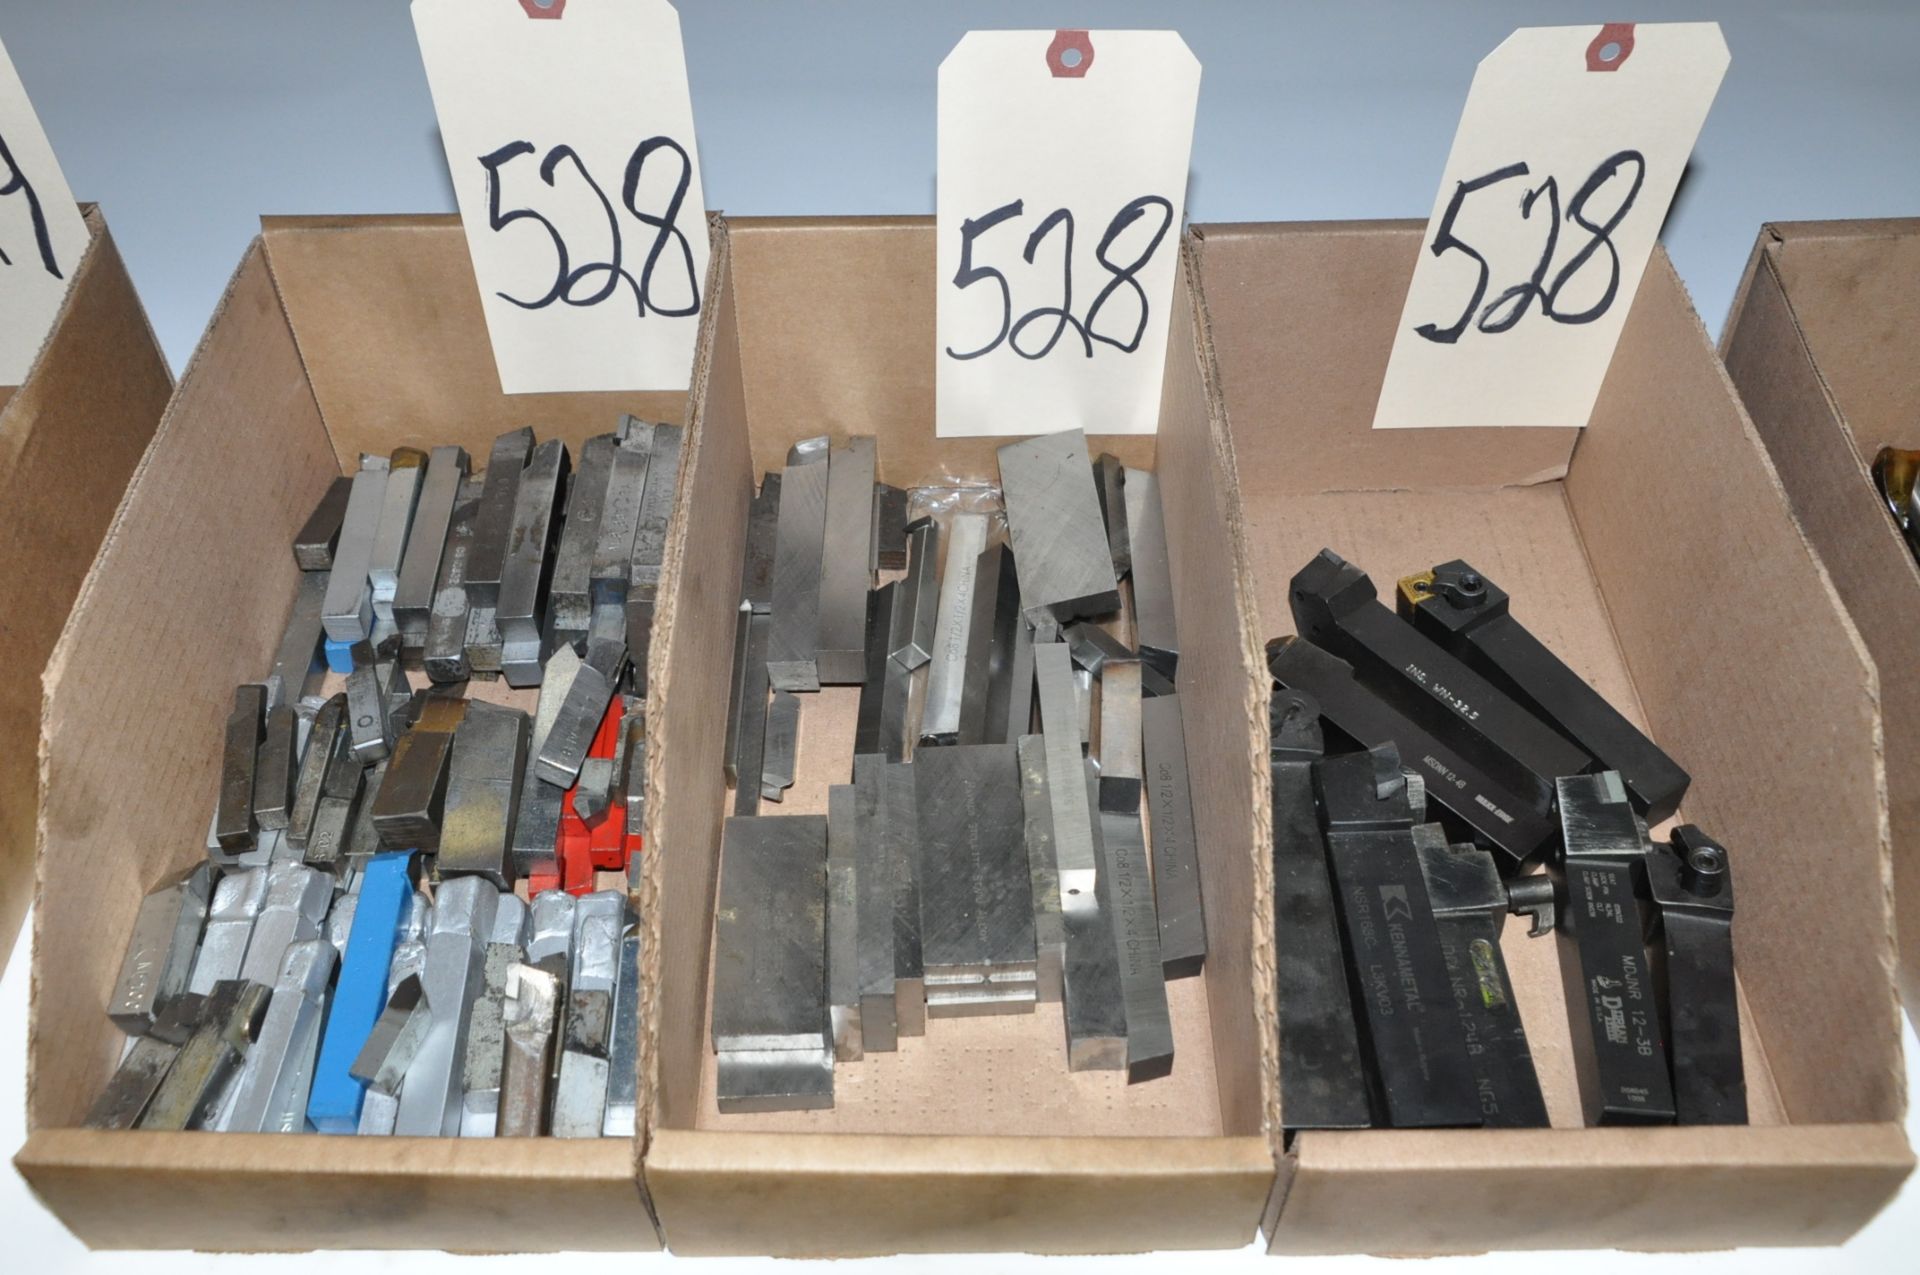 Lot-Insert Type Boring Bars, Cemented Carbide Tool Bits, and Standard Tool Bits in (3) Boxes on Lowe